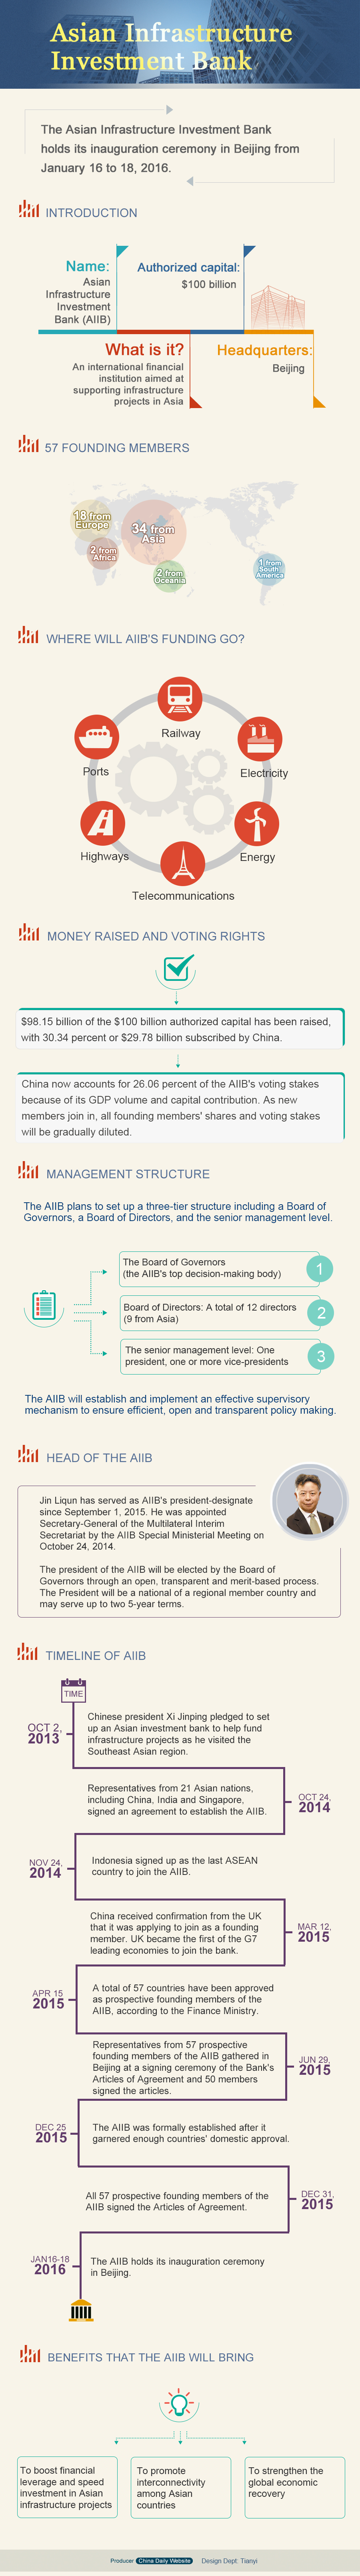 Infographics: Asian Infrastructure Investment Bank